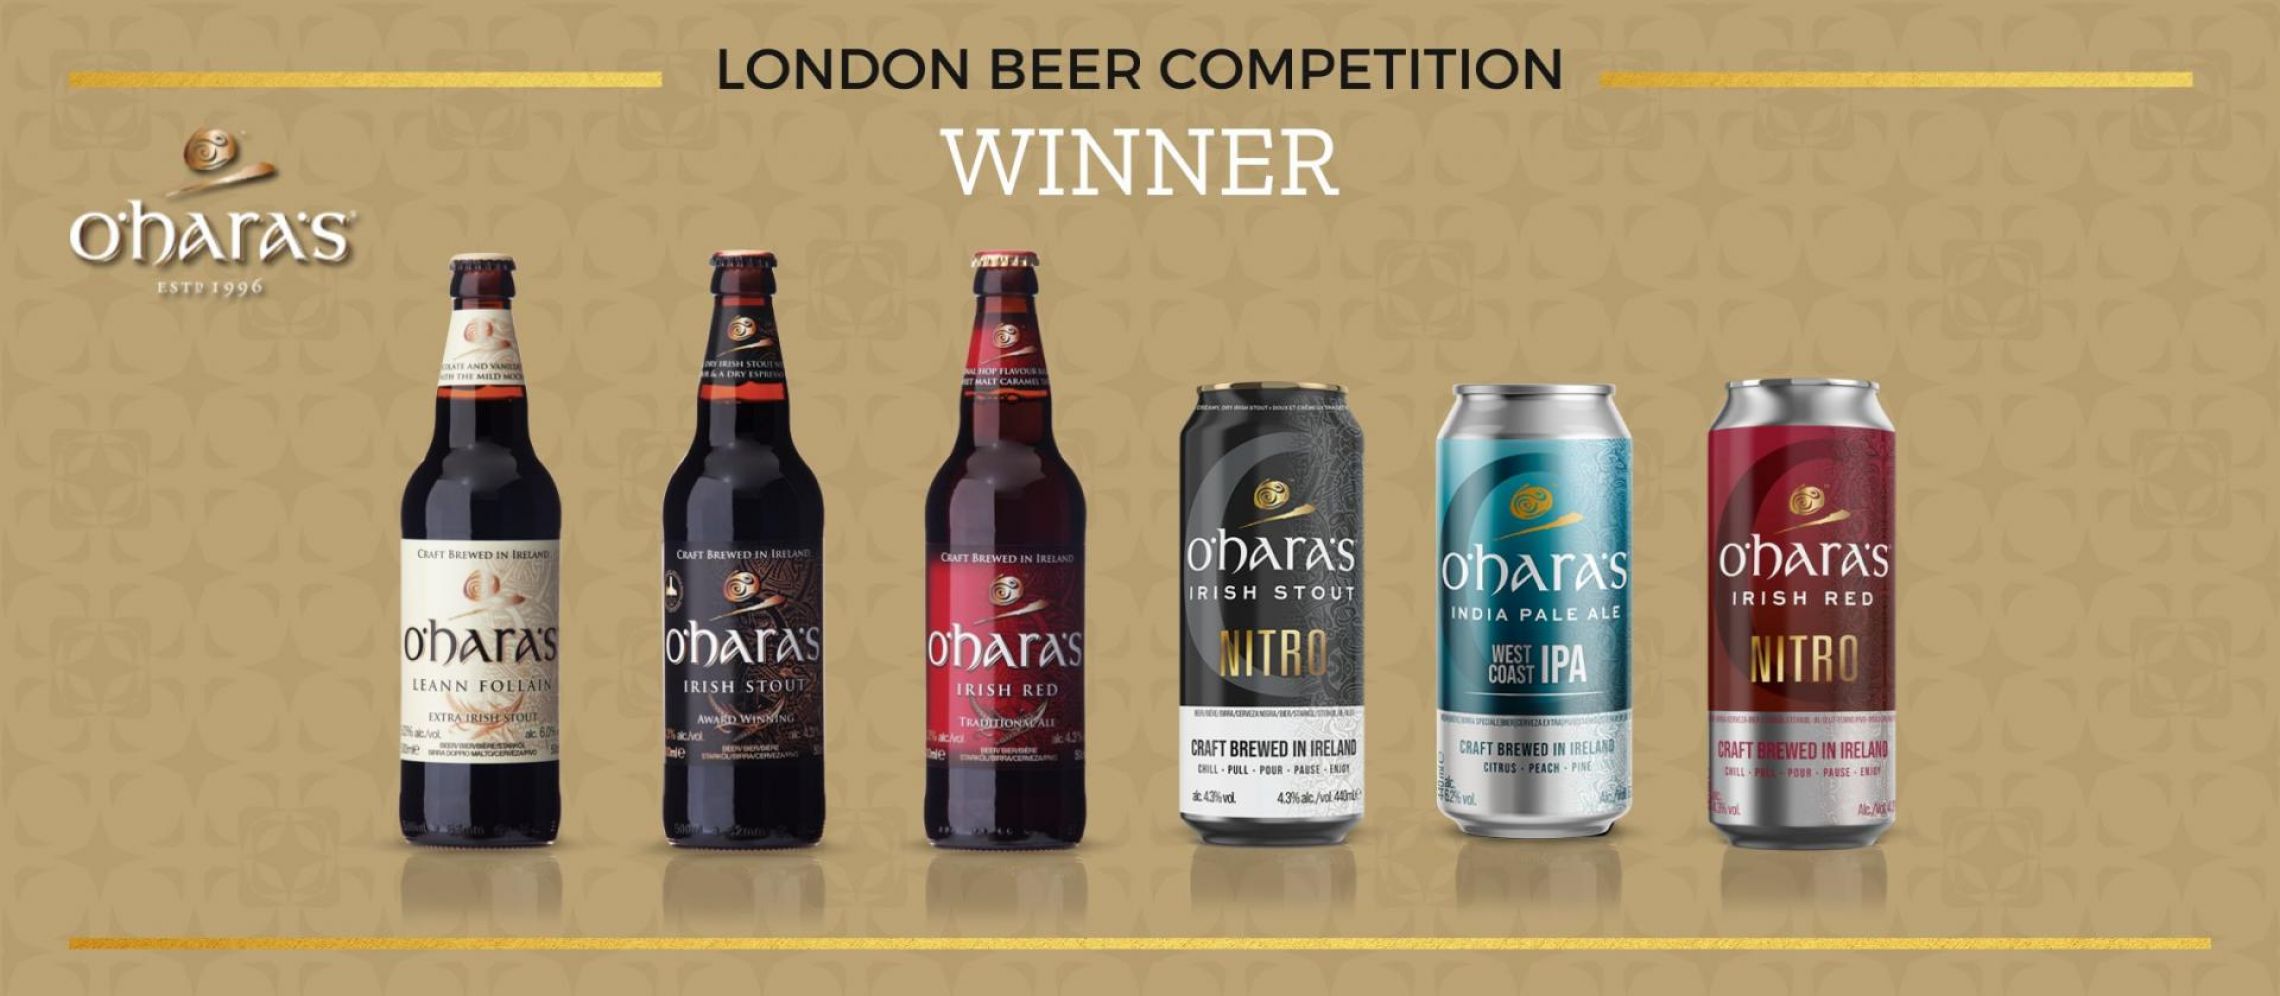 Photo for: O’Hara’s Irish Stout Nitro proved dynamite at the London Beer Competition 2022